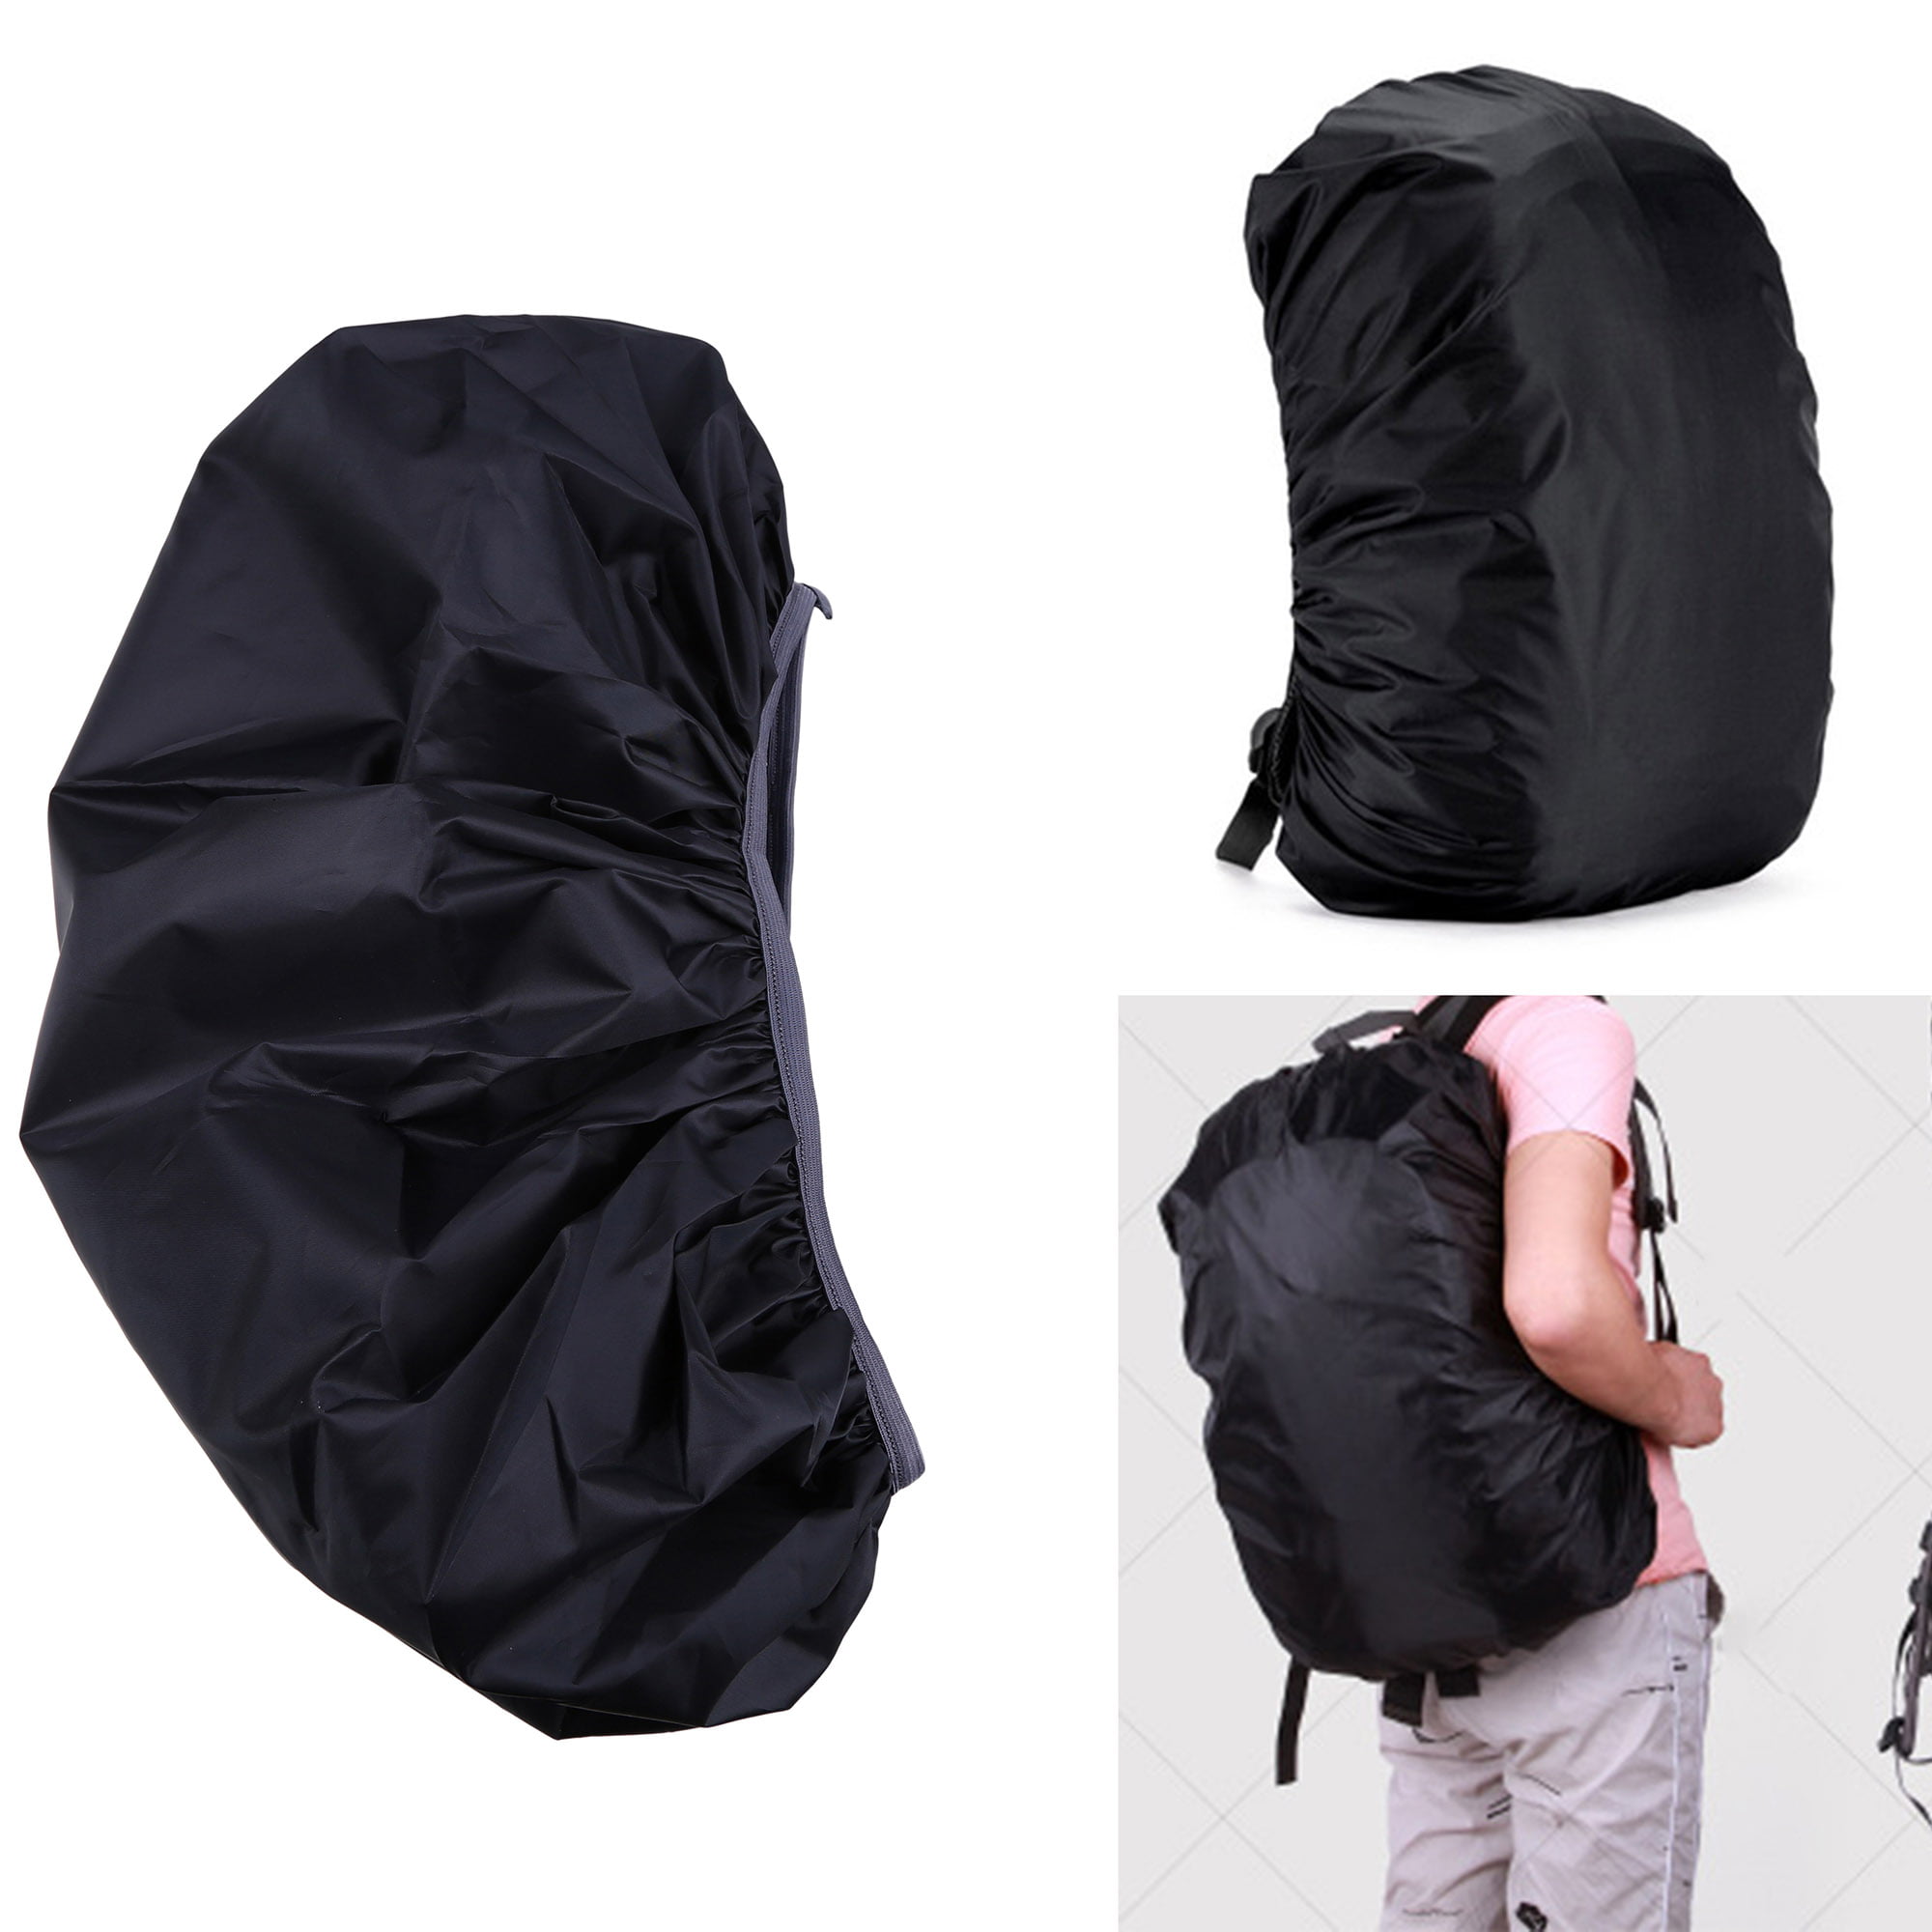 Details about   35L Backpack Rain Cover Travel Bag Rucksack Foldable Outdoor WaterProof